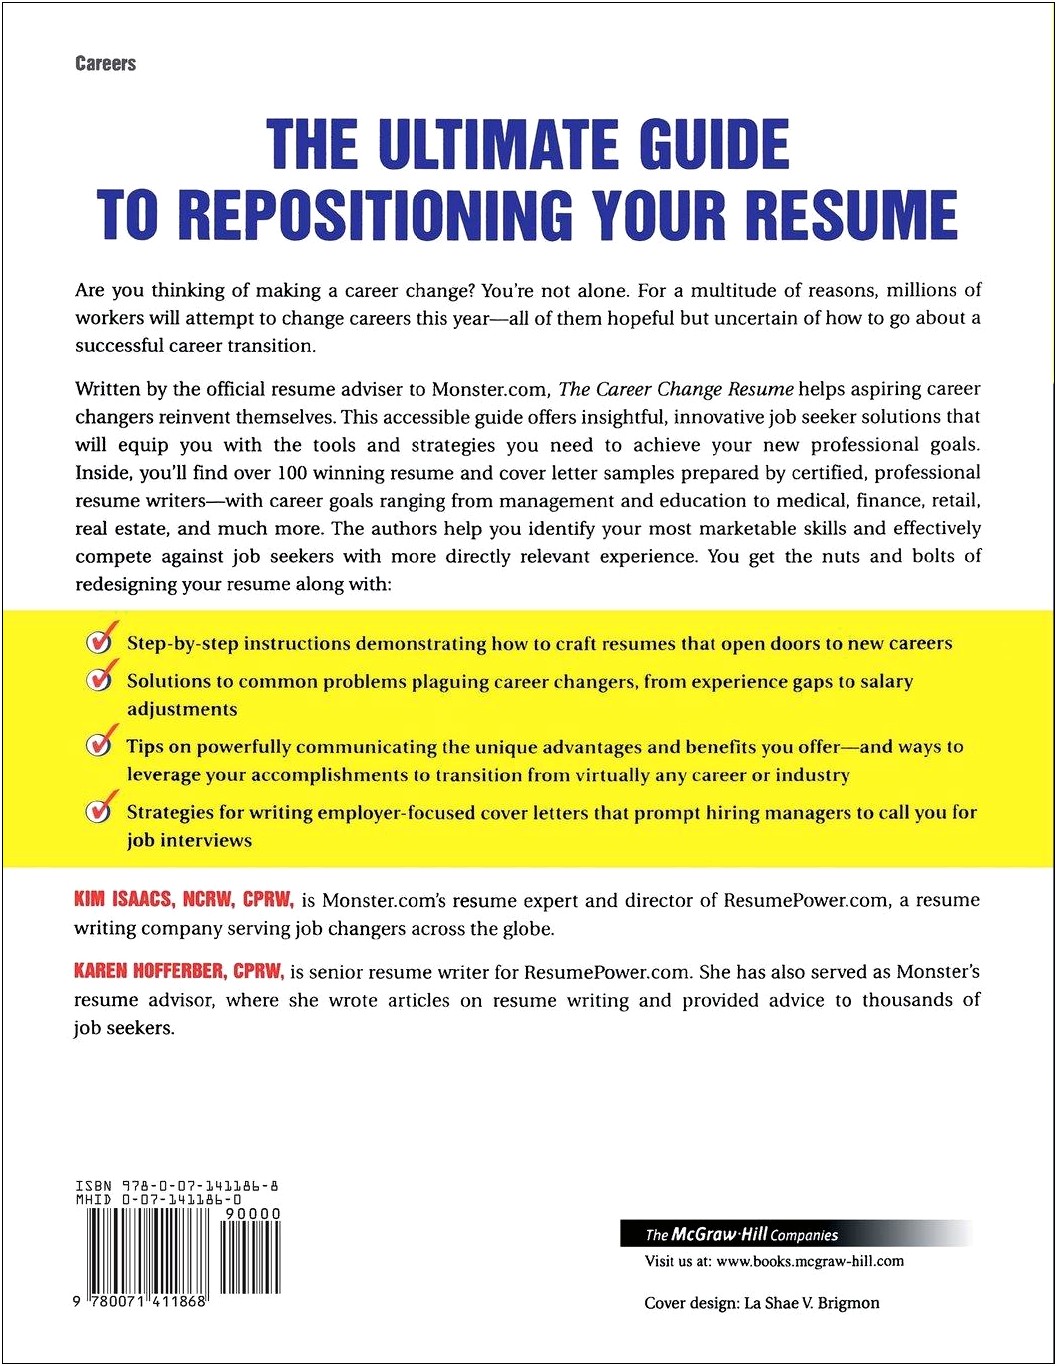 Resume Writing Tips For A Job Change